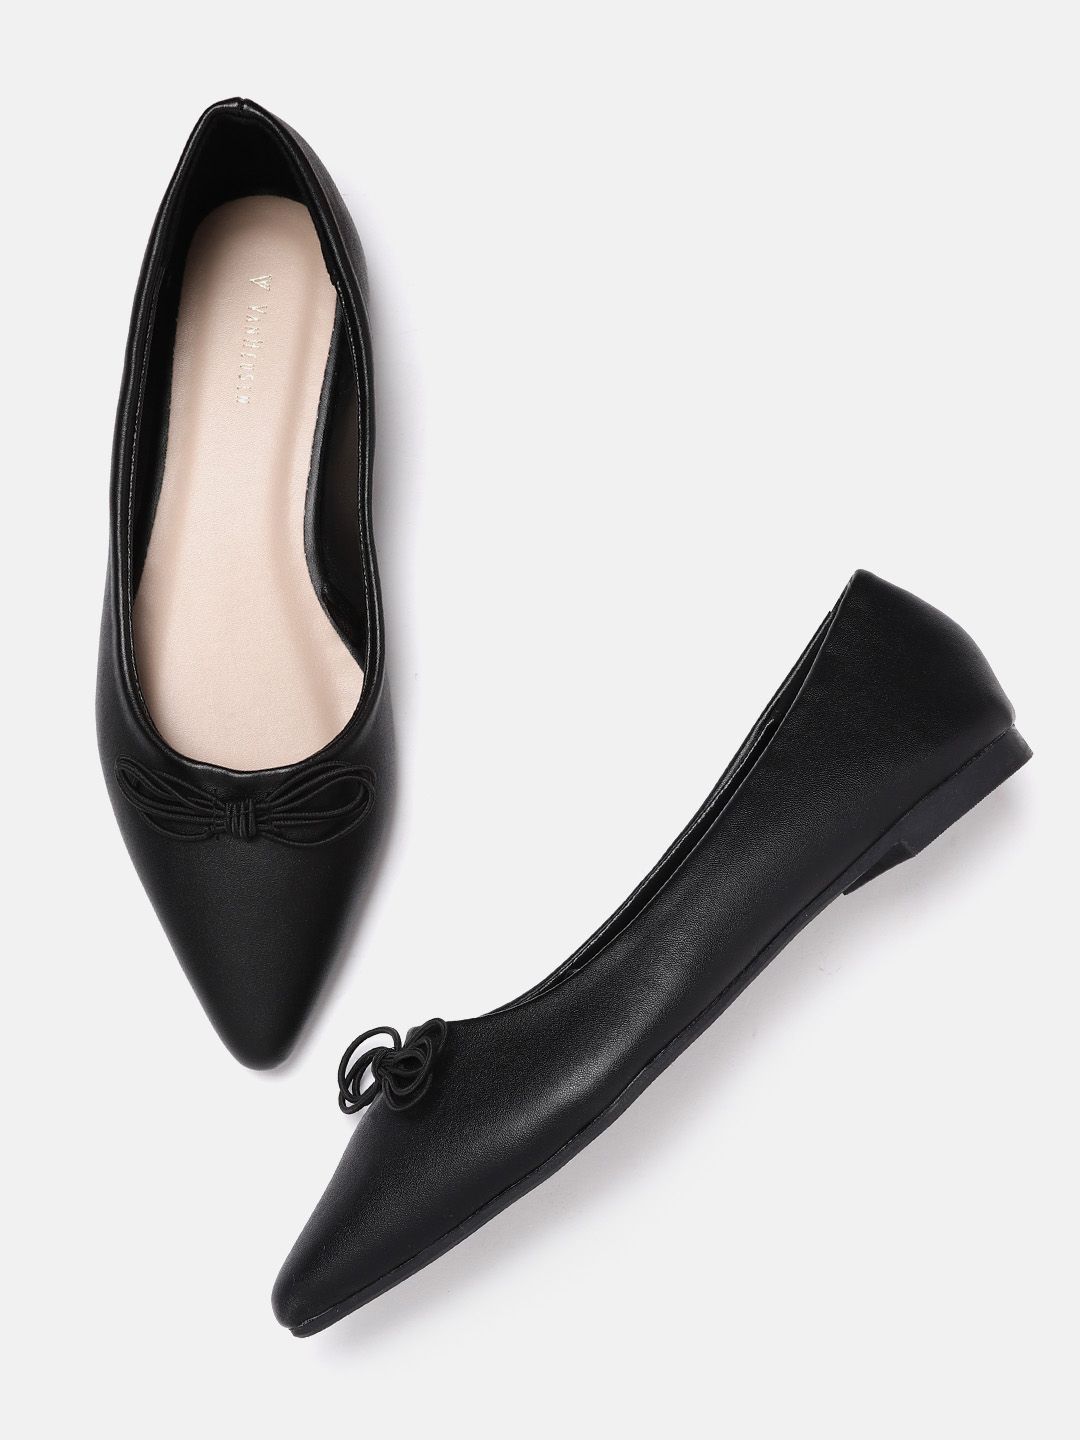 Van Heusen Woman Black Solid Ballerinas with Bows Detail Price in India